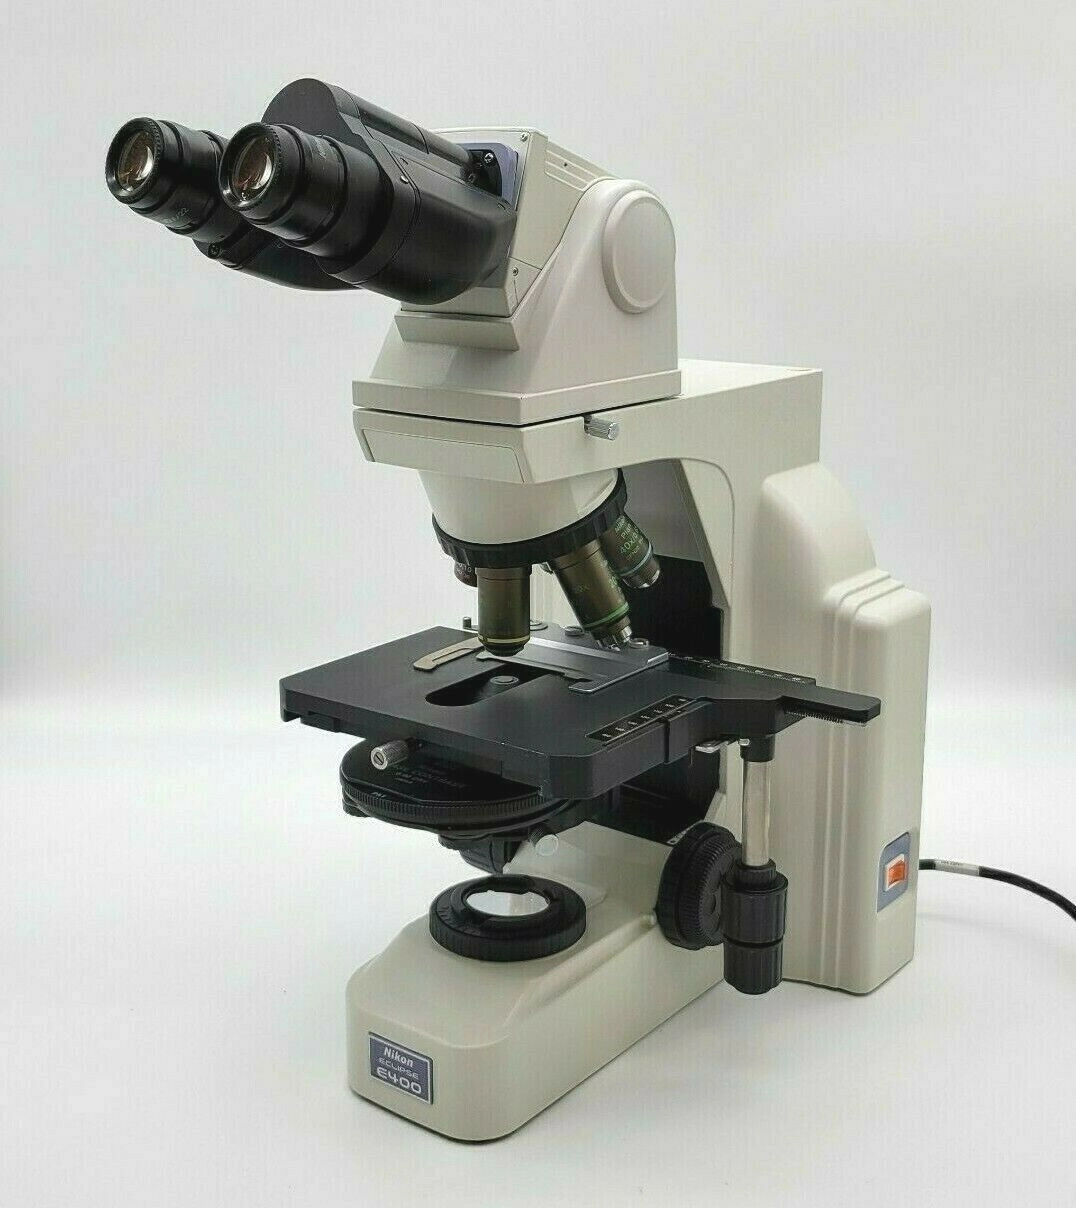 Nikon Microscope Eclipse E400 with Phase Contrast and Tilting Ergo Head